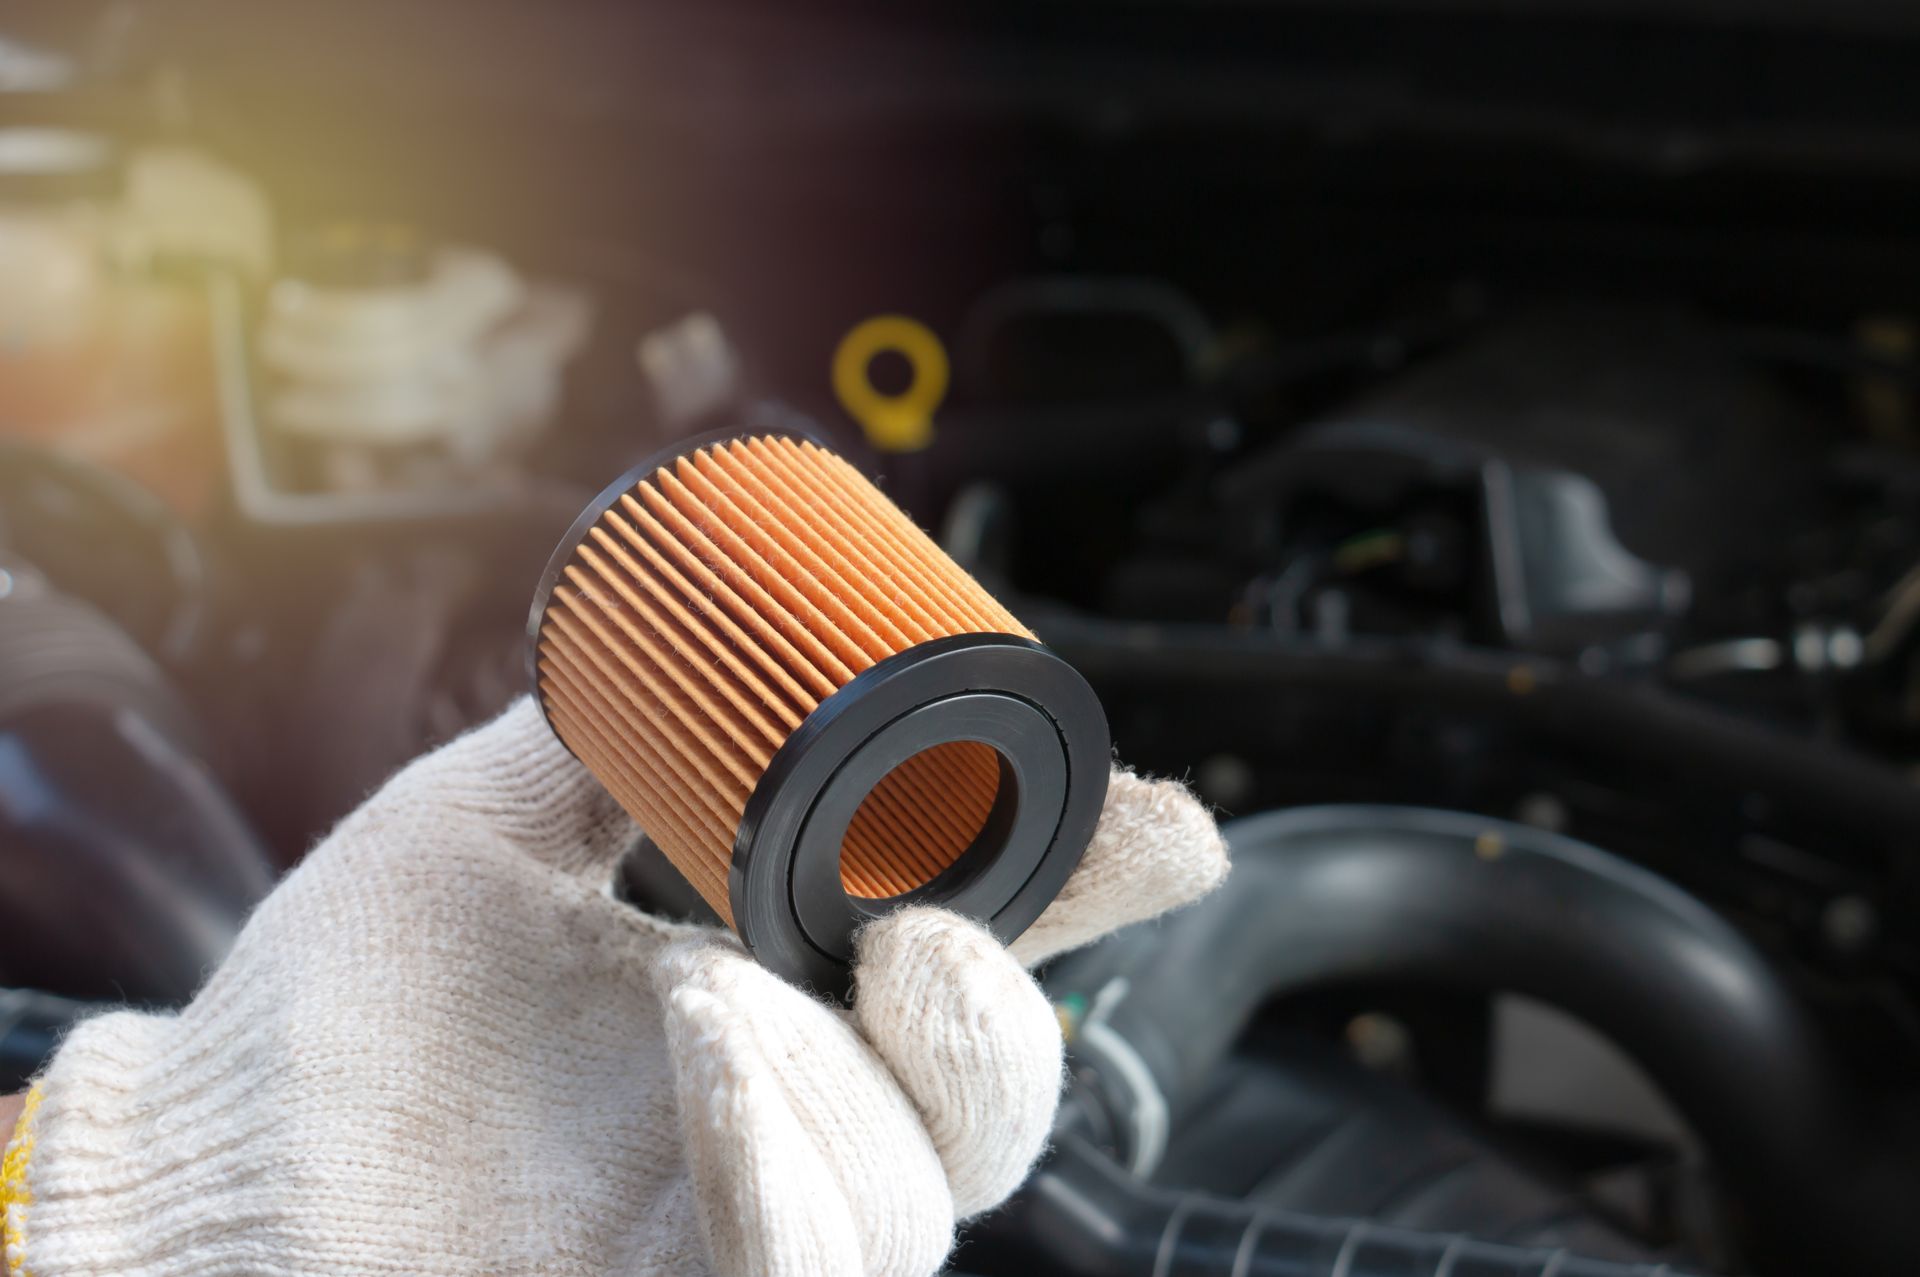 Fuel Filter Service at ﻿Jerry's Auto Repair﻿ in ﻿Pullman, WA﻿﻿